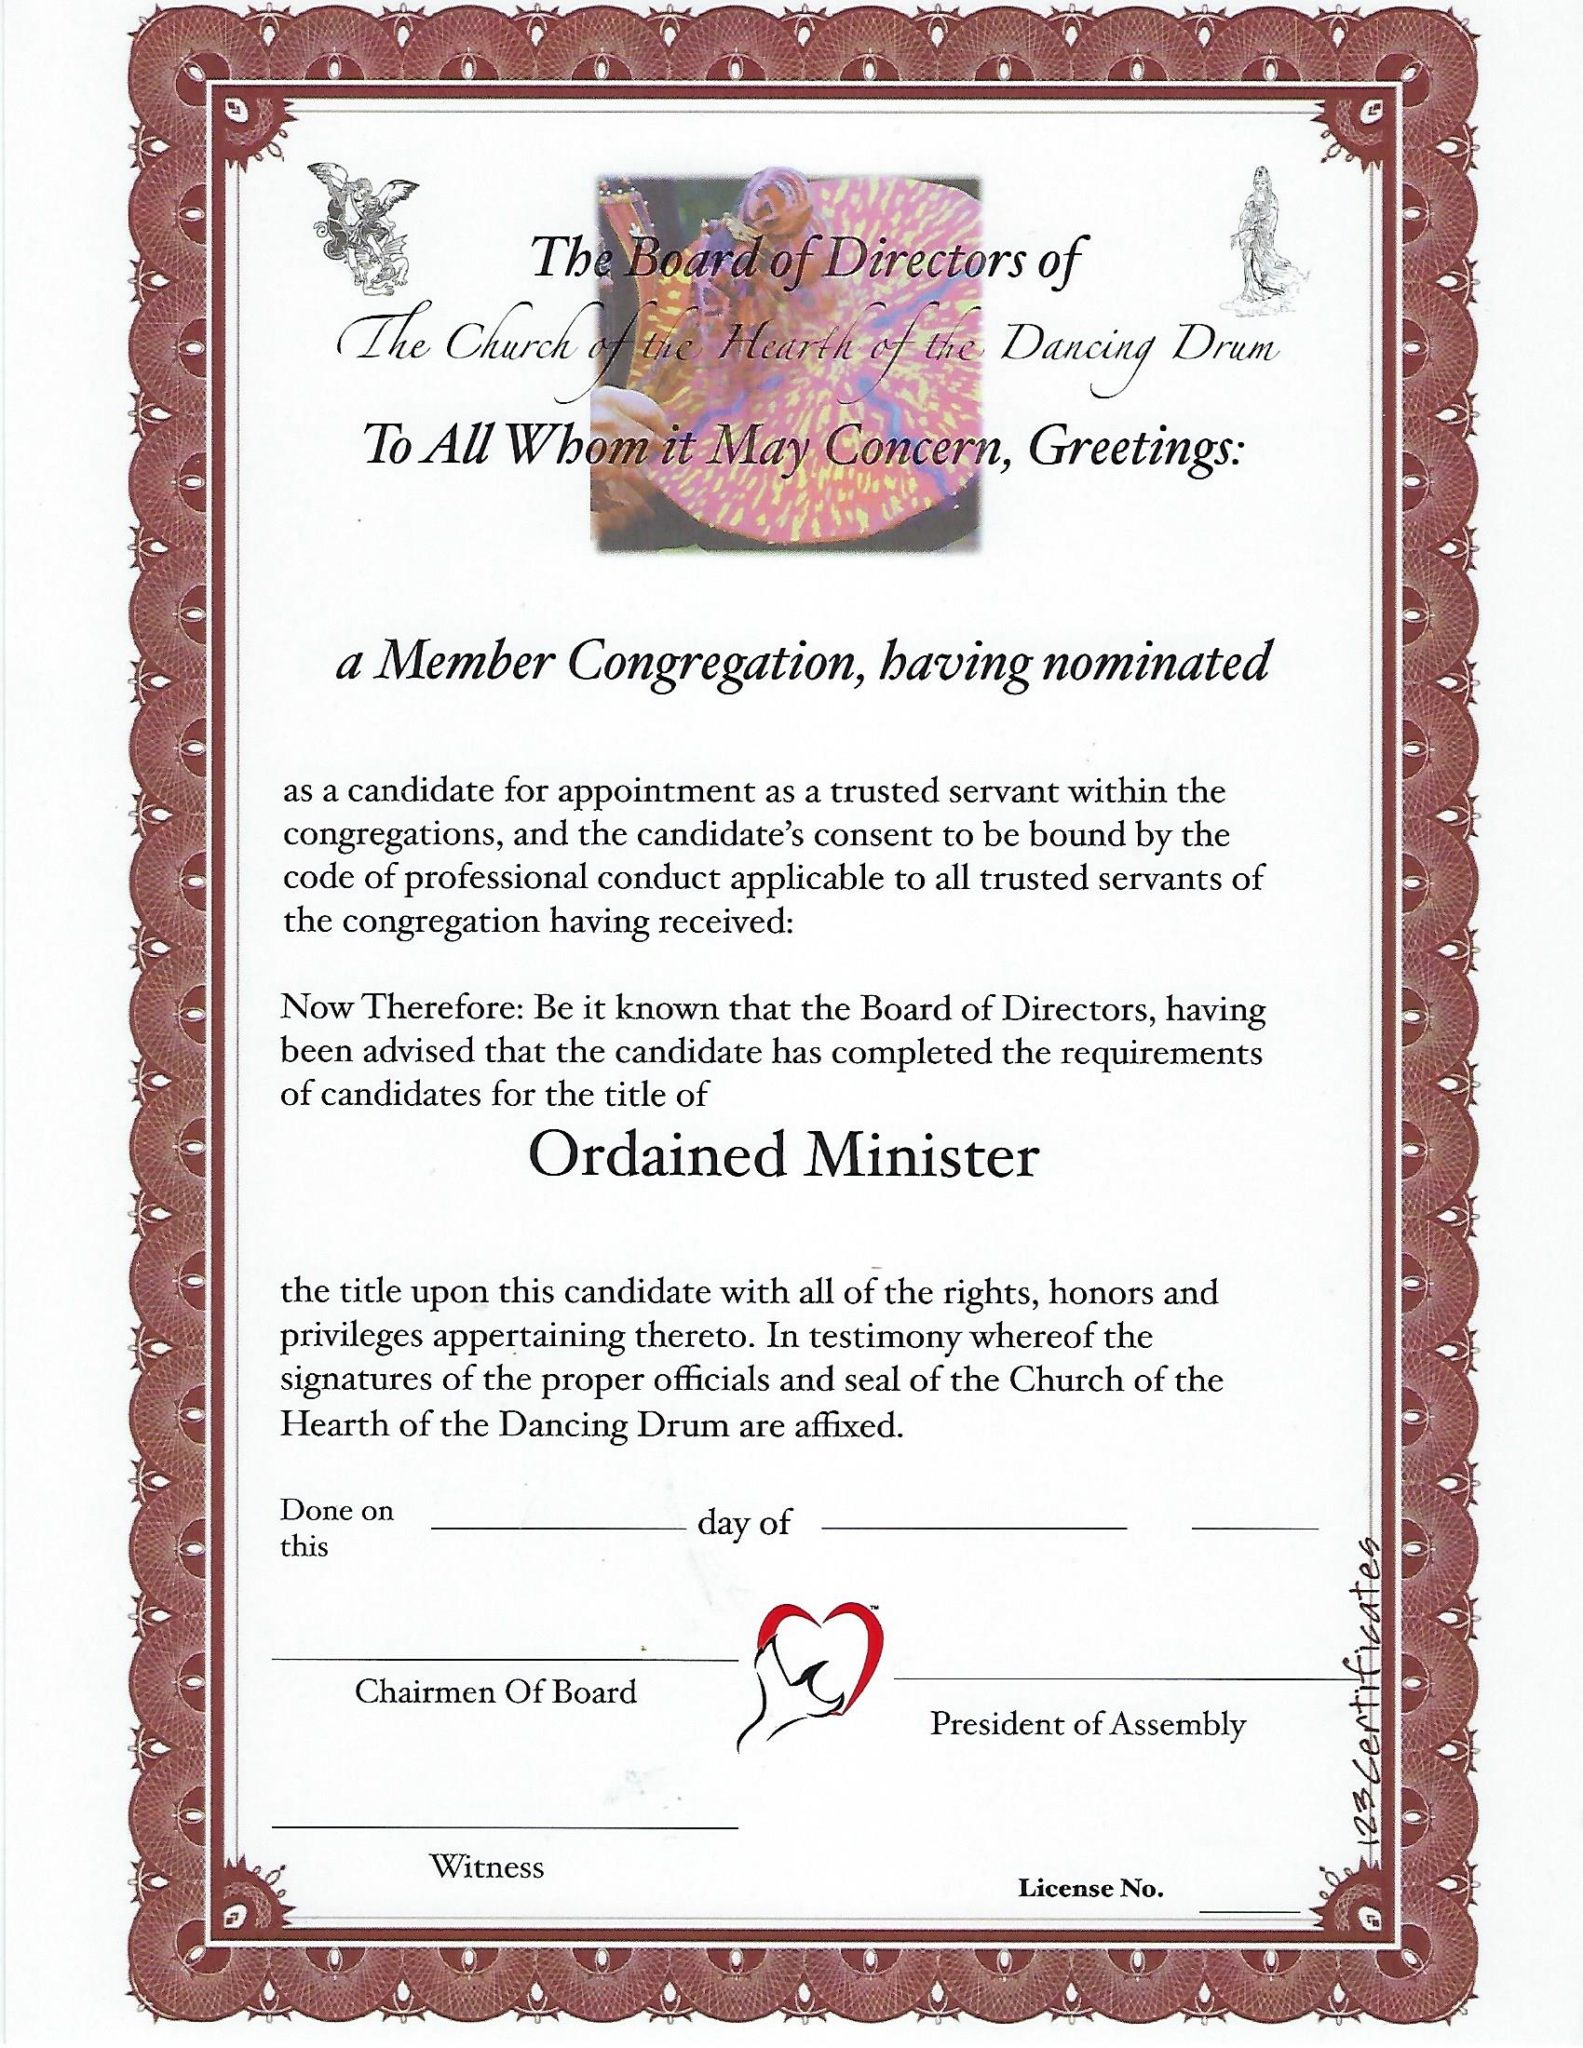 Minister License Packet Become An Ordained Minister